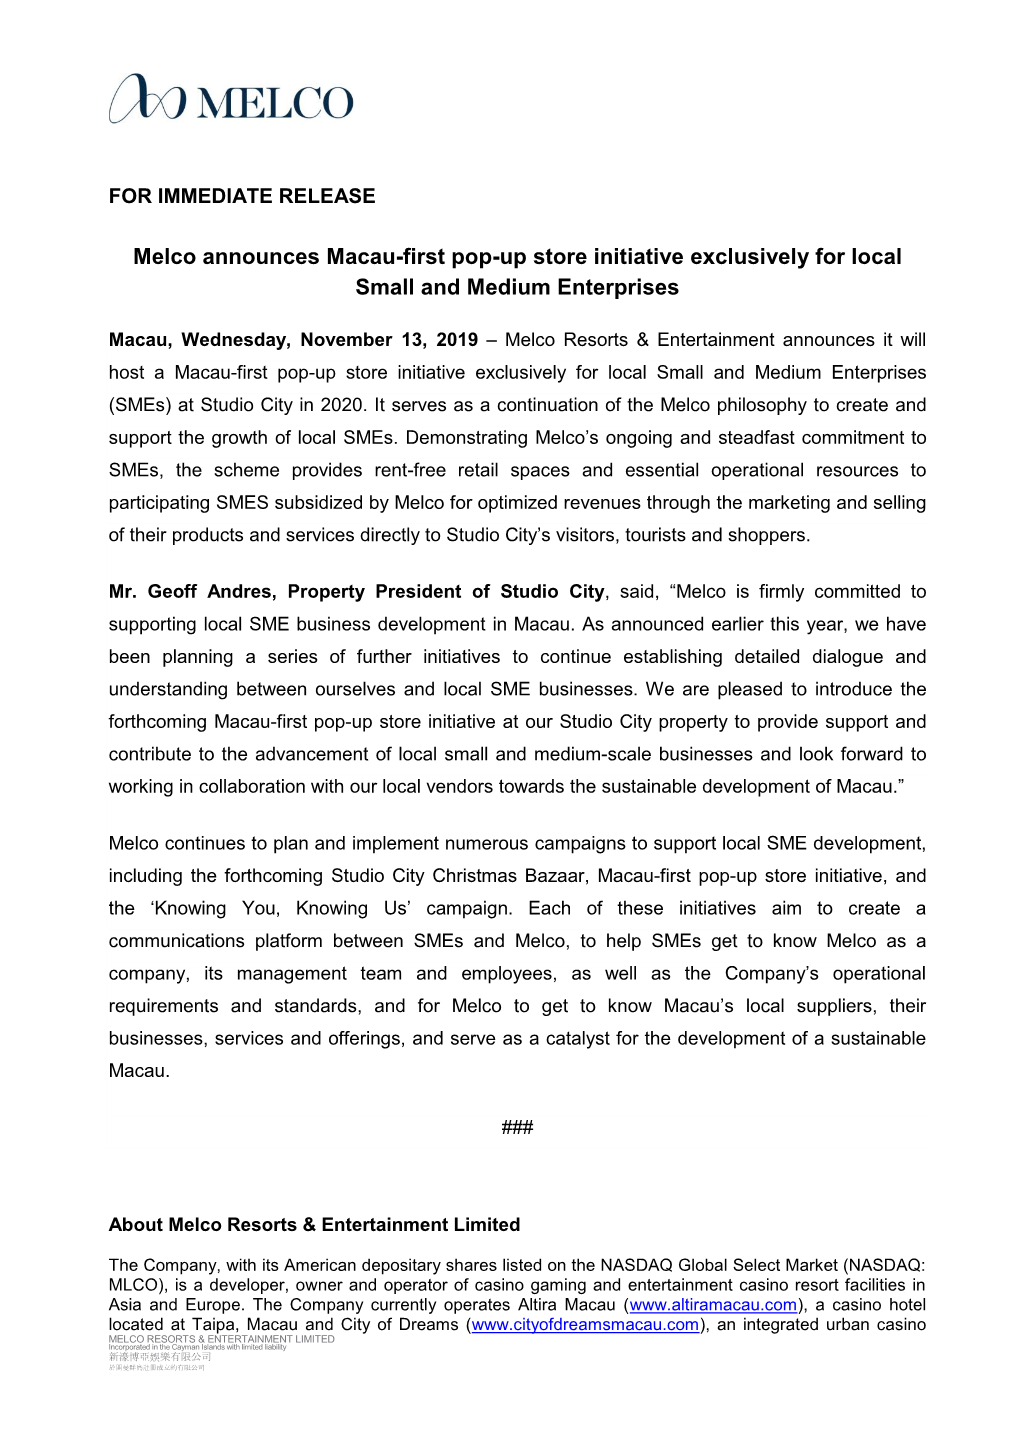 Nov 13, 2019 Melco Announces Macau-First Pop-Up Store Initiative Exclusively for Local Small